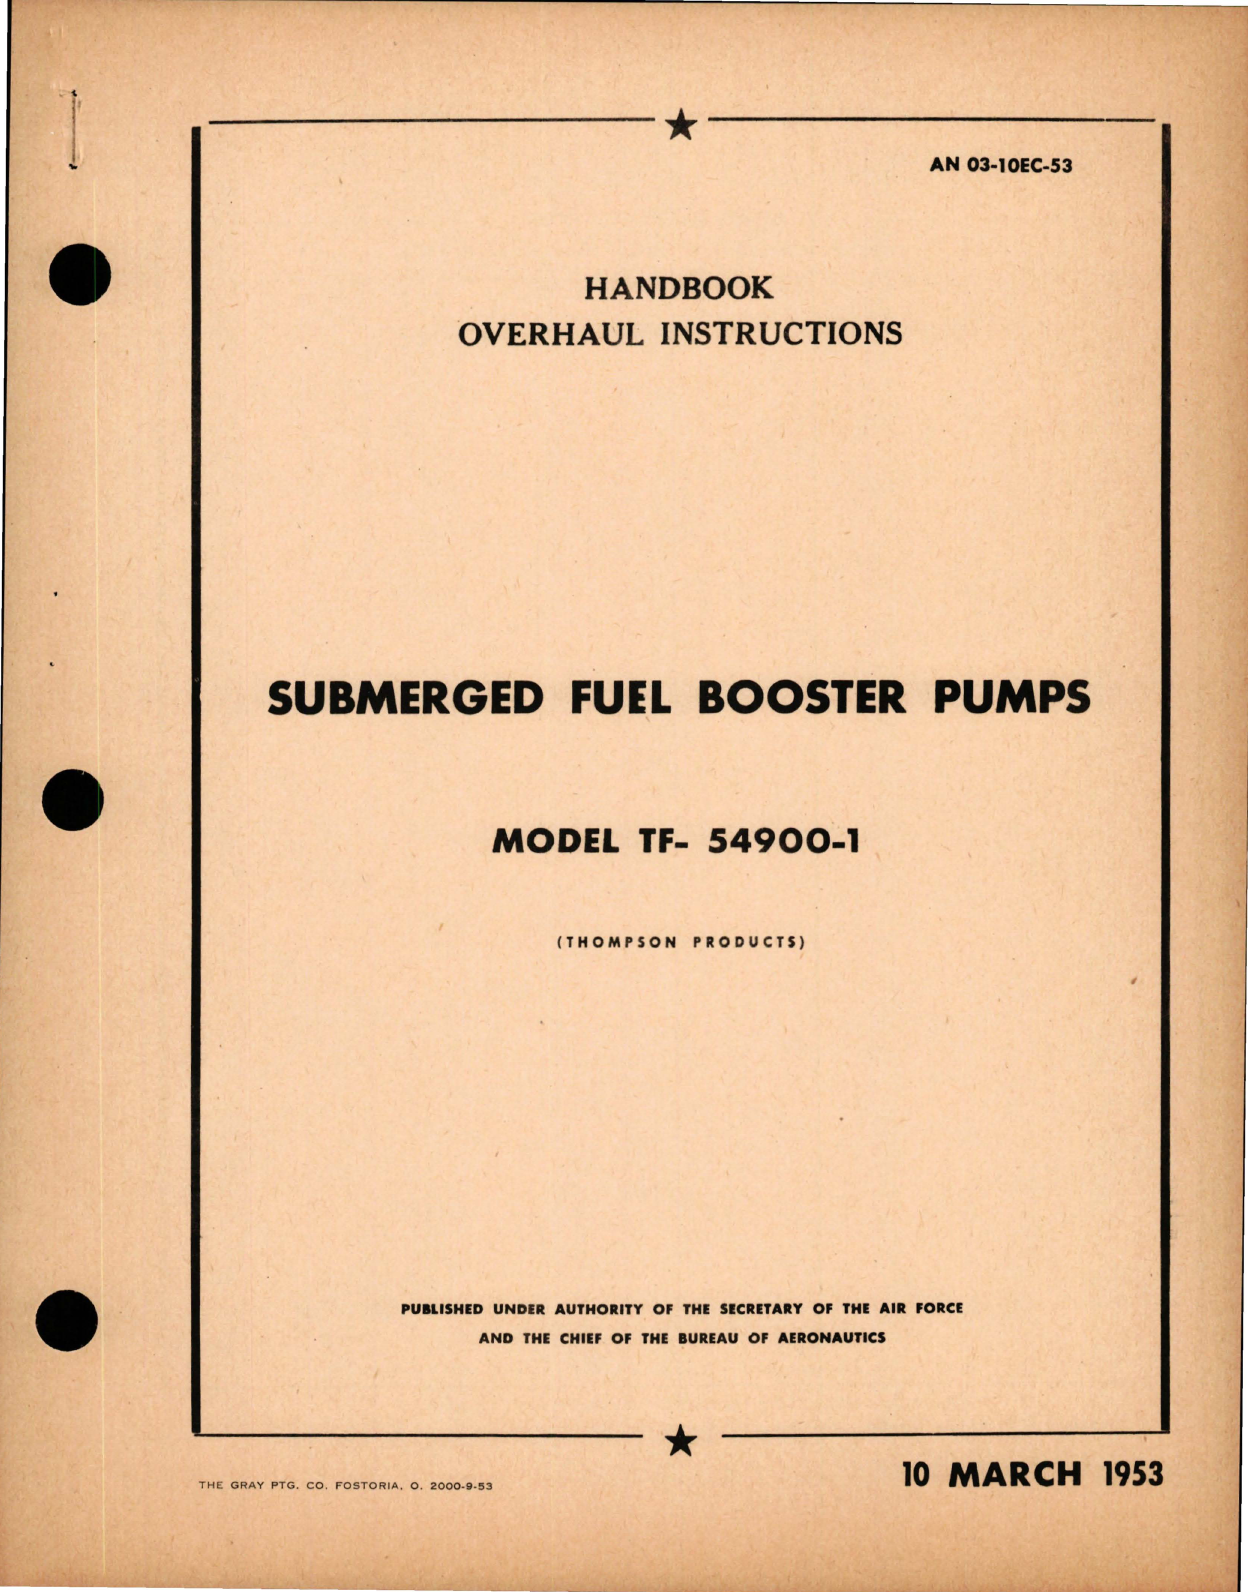 Sample page 1 from AirCorps Library document: Overhaul Instructions for Submerged Fuel Booster Pumps - Model TF-54900-1